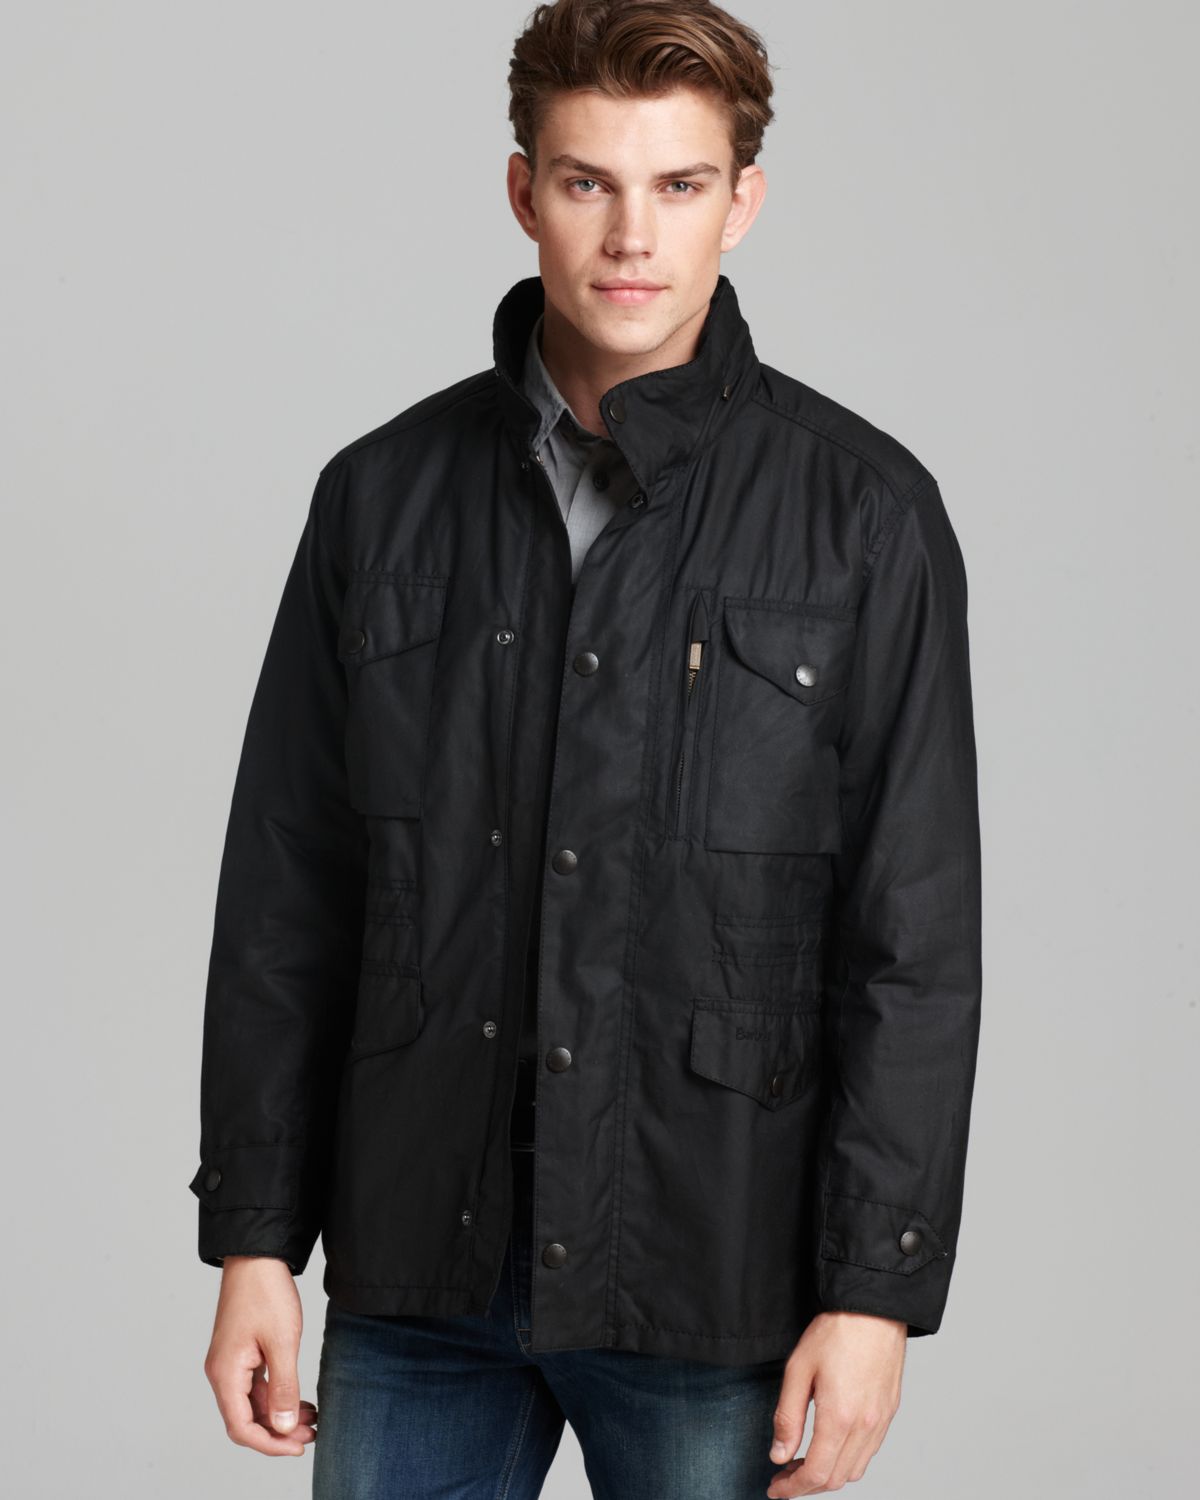 Barbour Sapper Waxed Cotton Jacket in Black for Men - Lyst